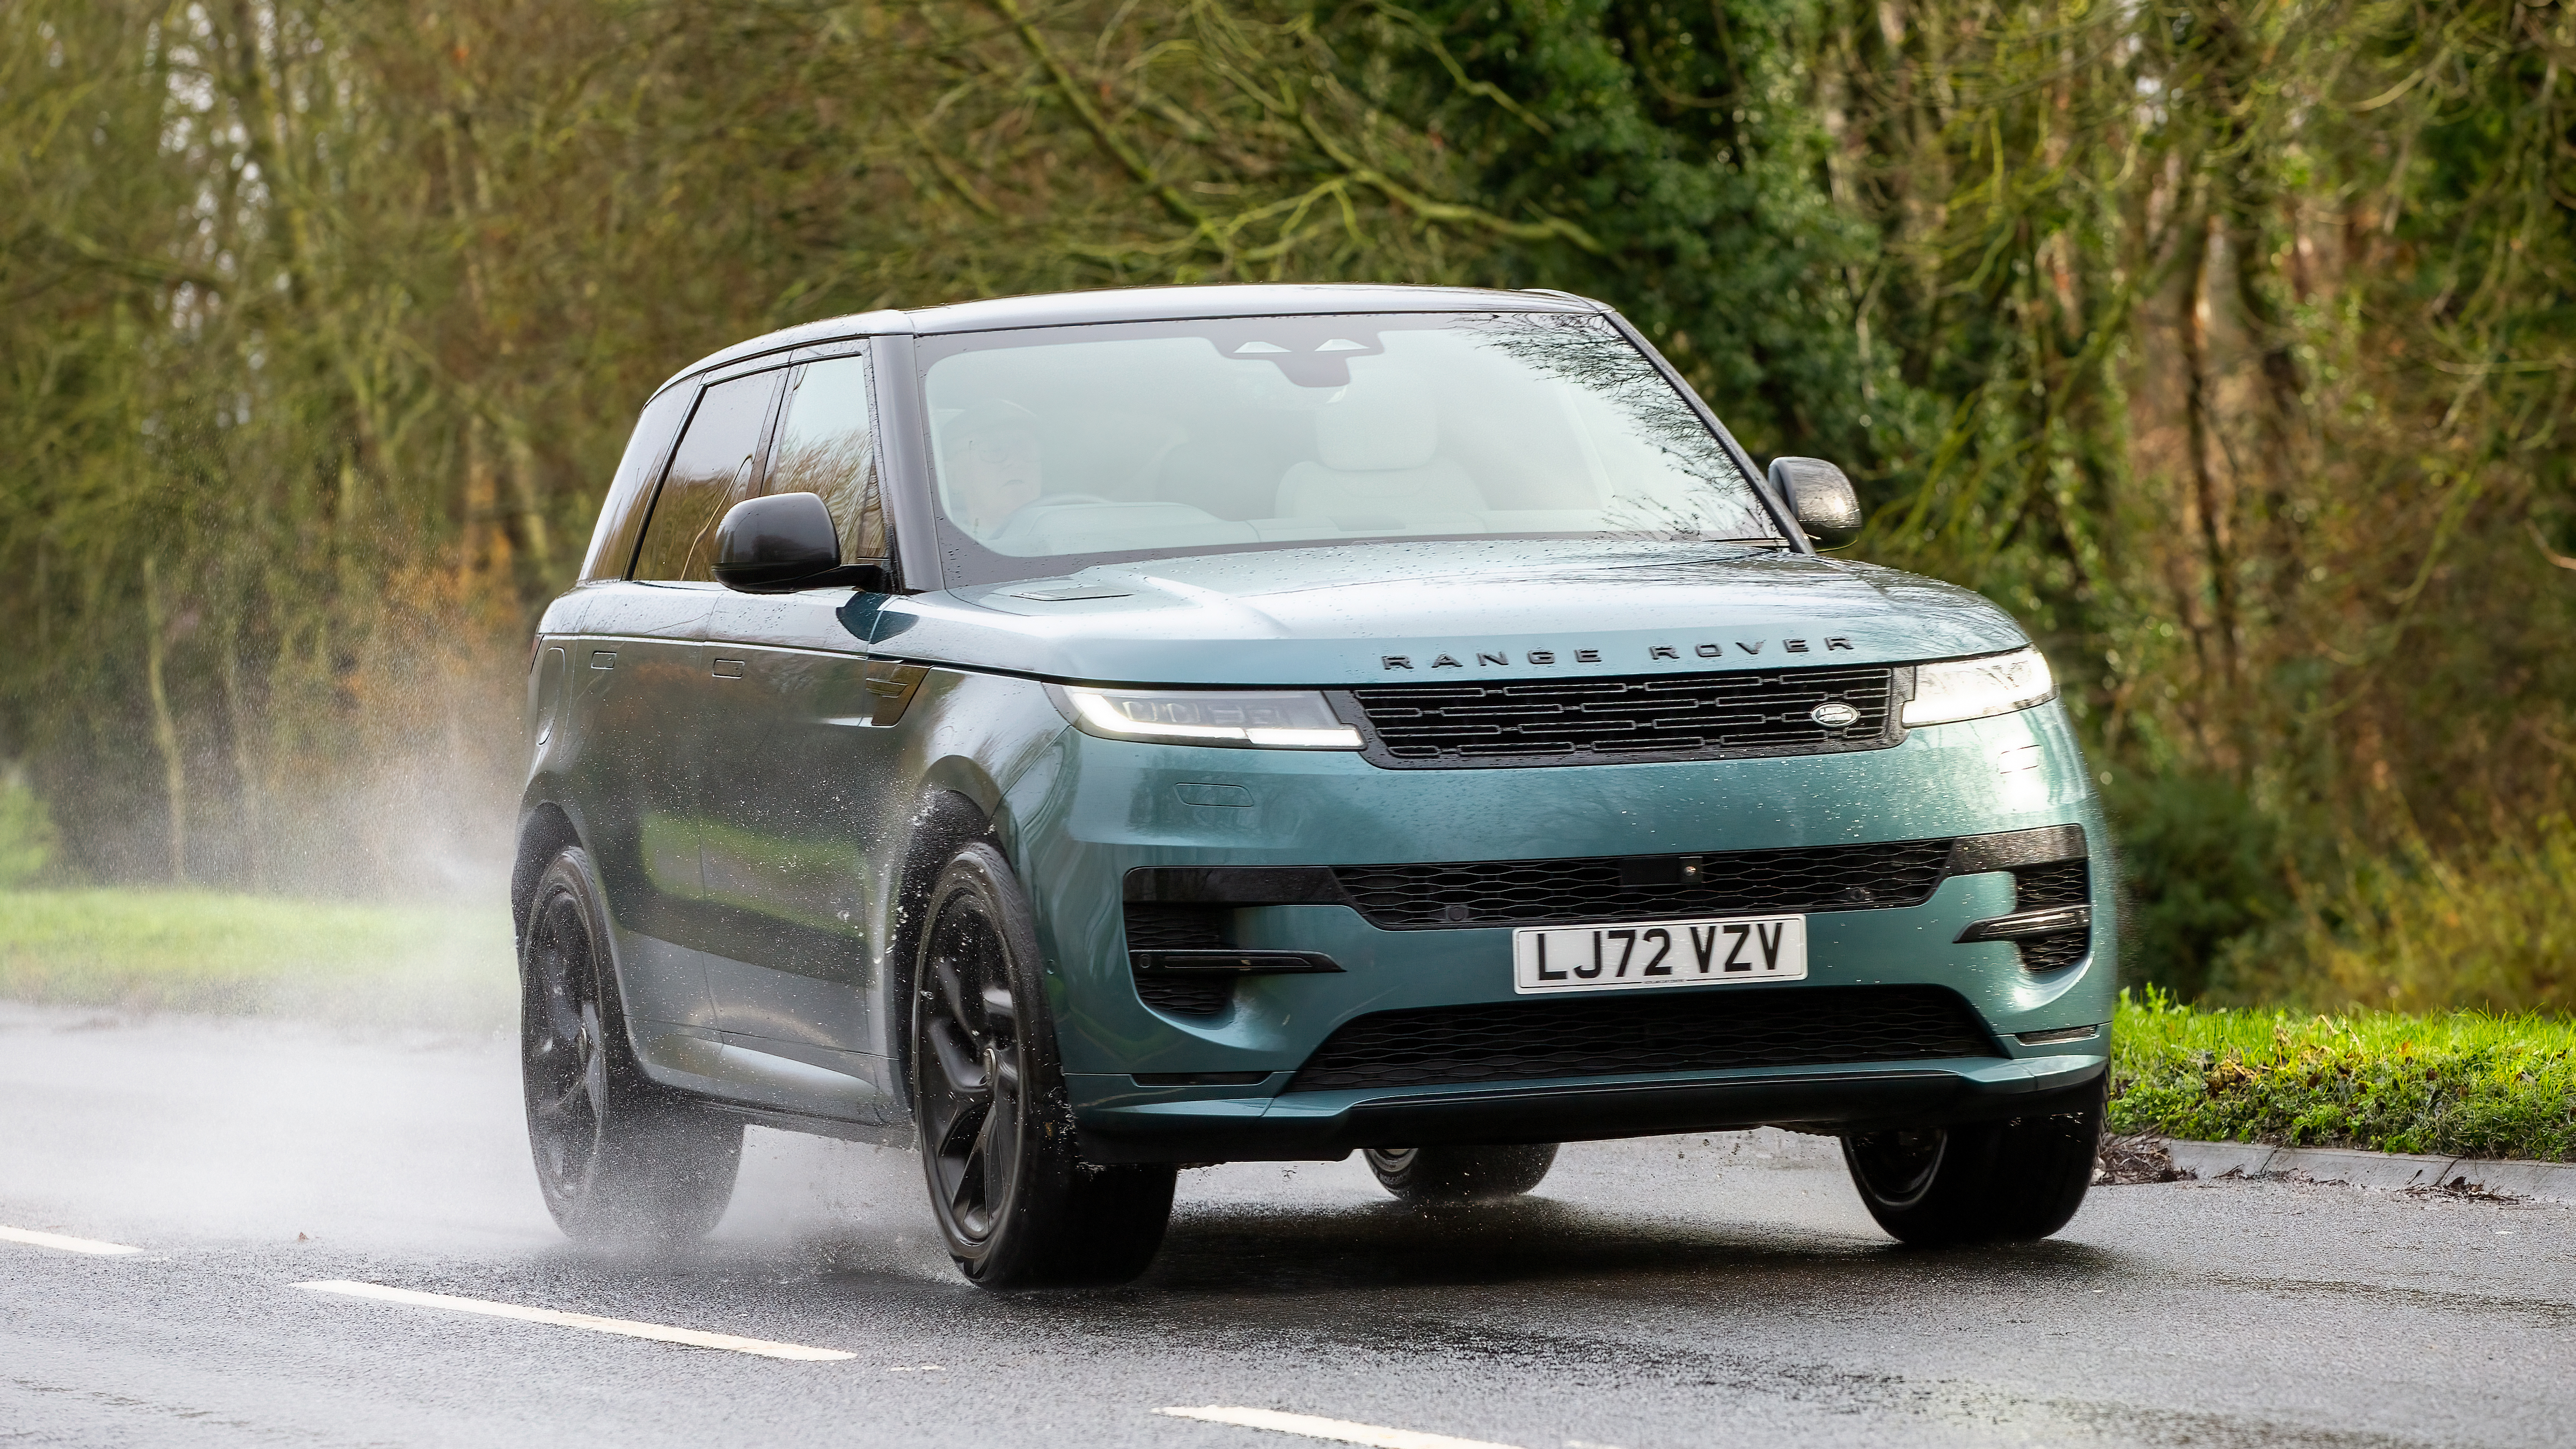 It will cost drivers anywhere between £75,000 to £114,000 to purchase a Range Rover Sport